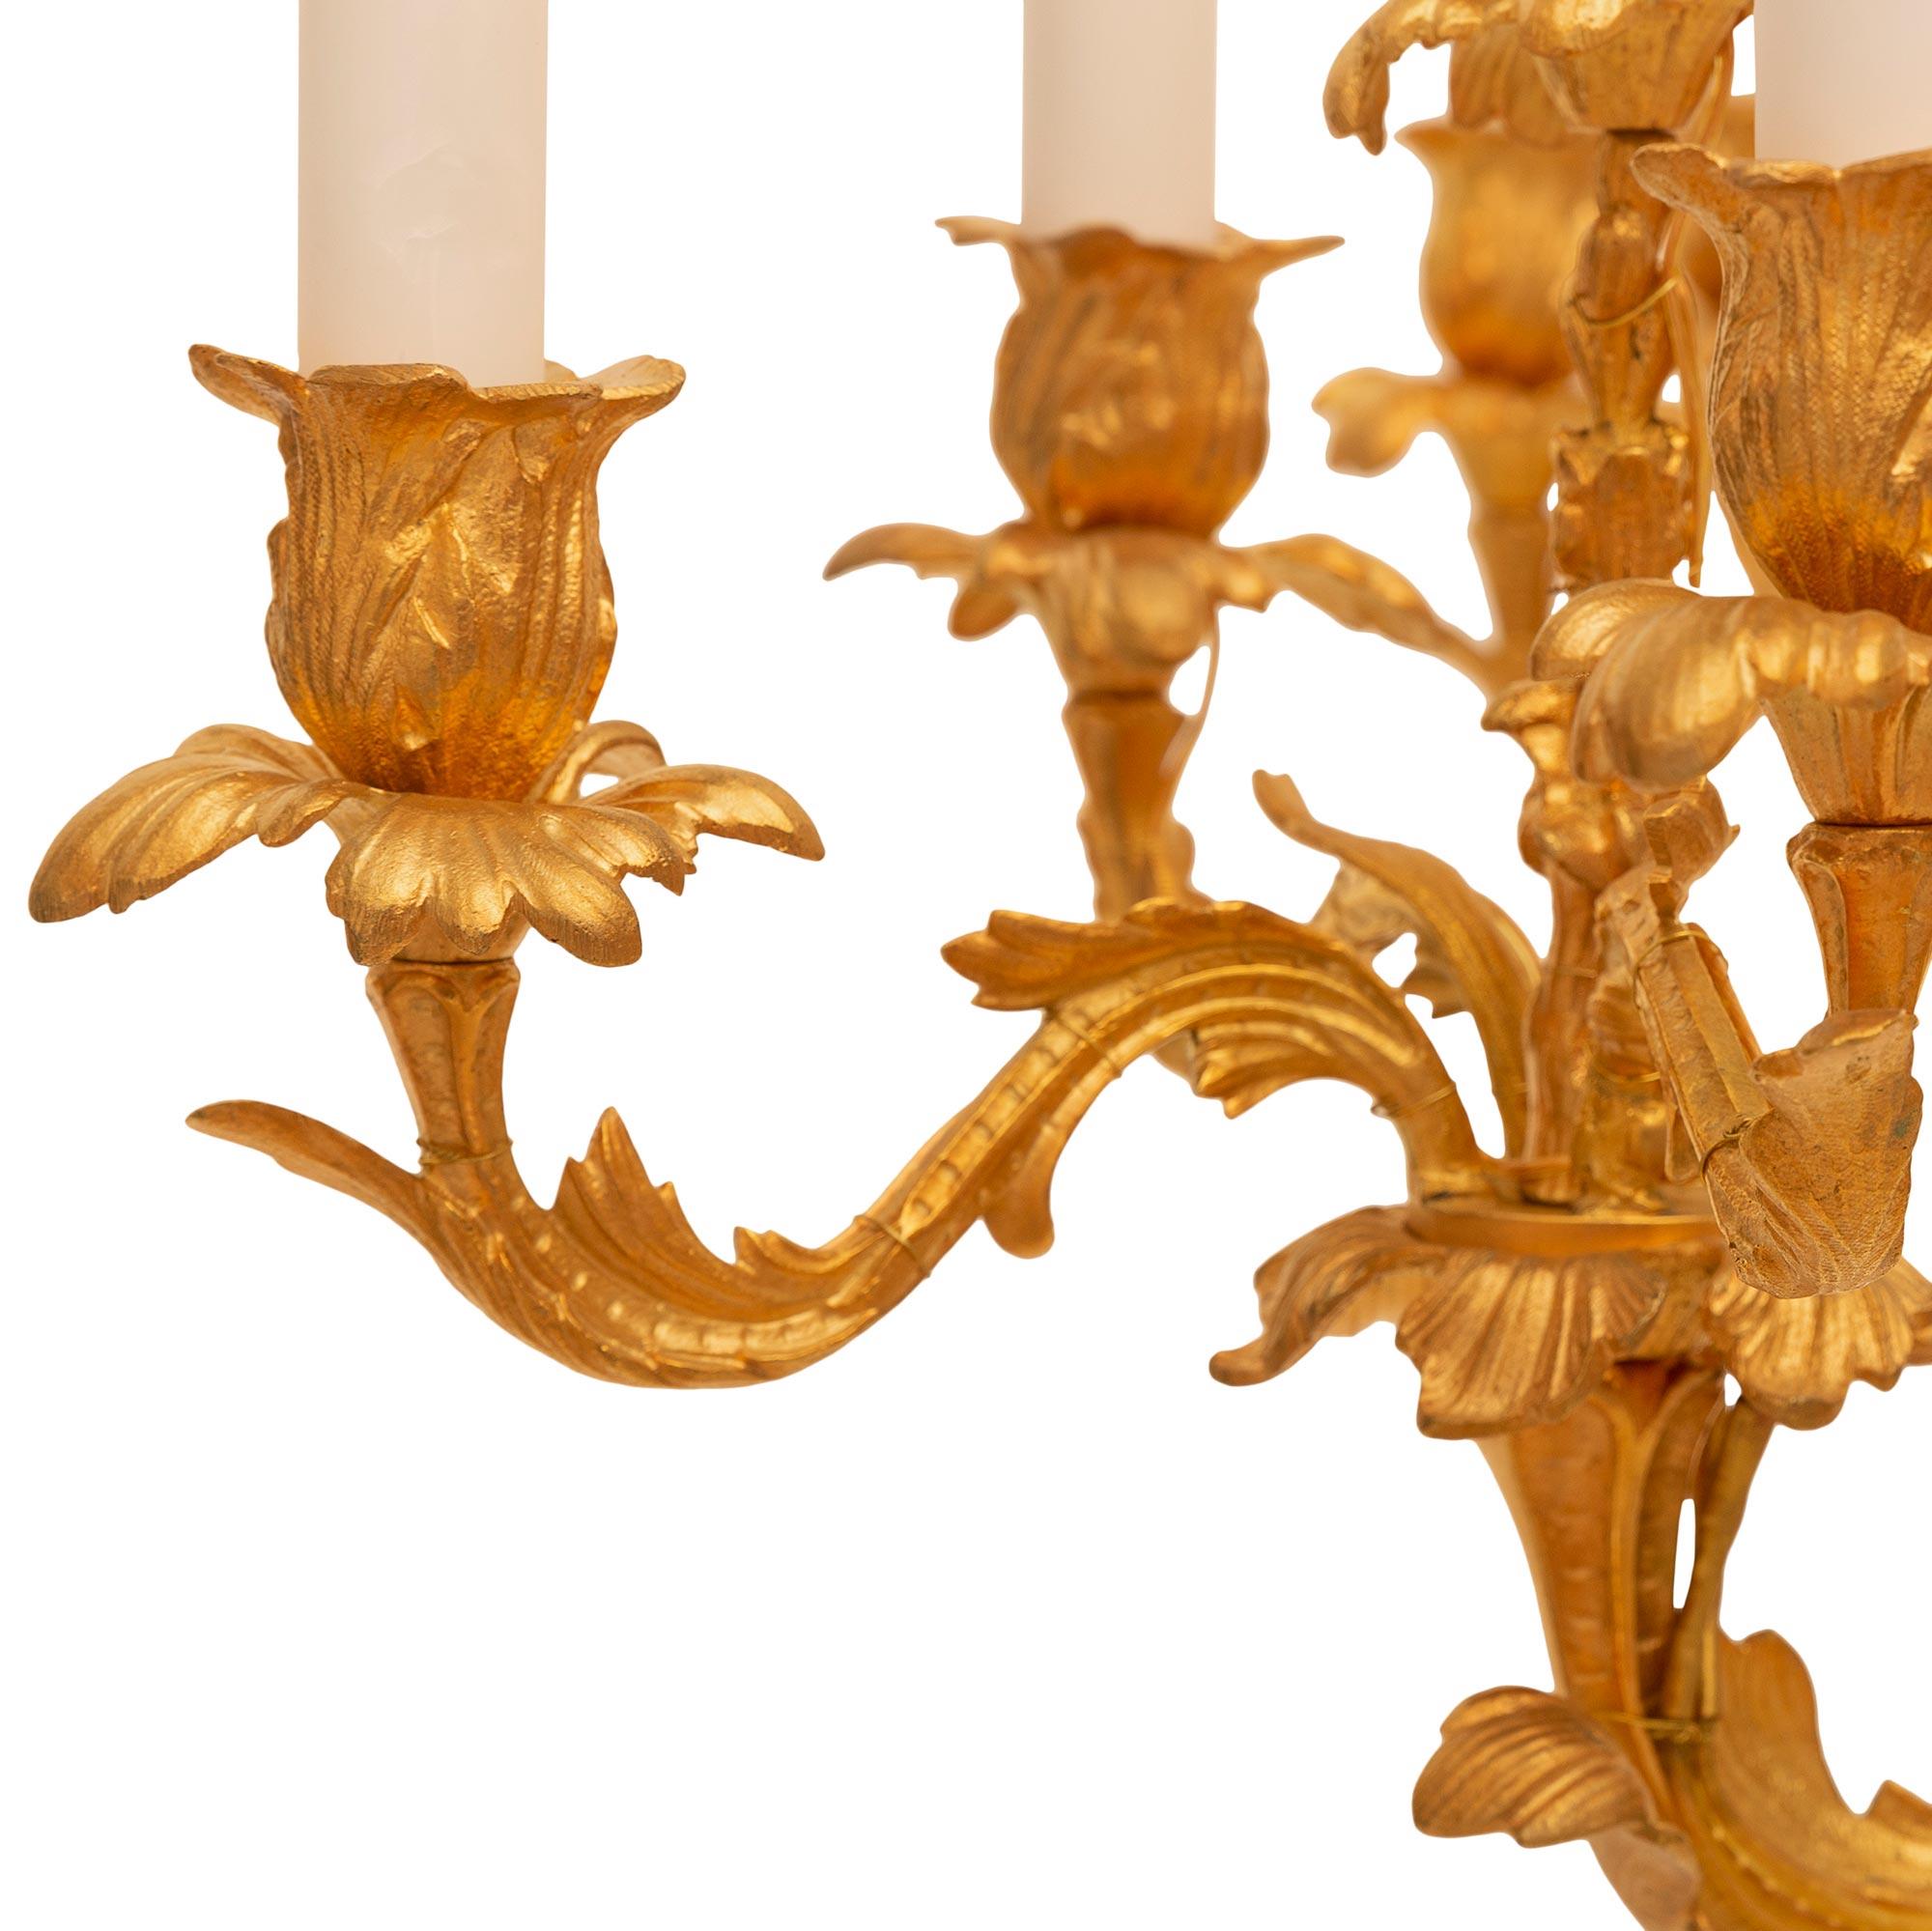 French 19th Century Louis XV St. Ormolu Chandelier For Sale 2